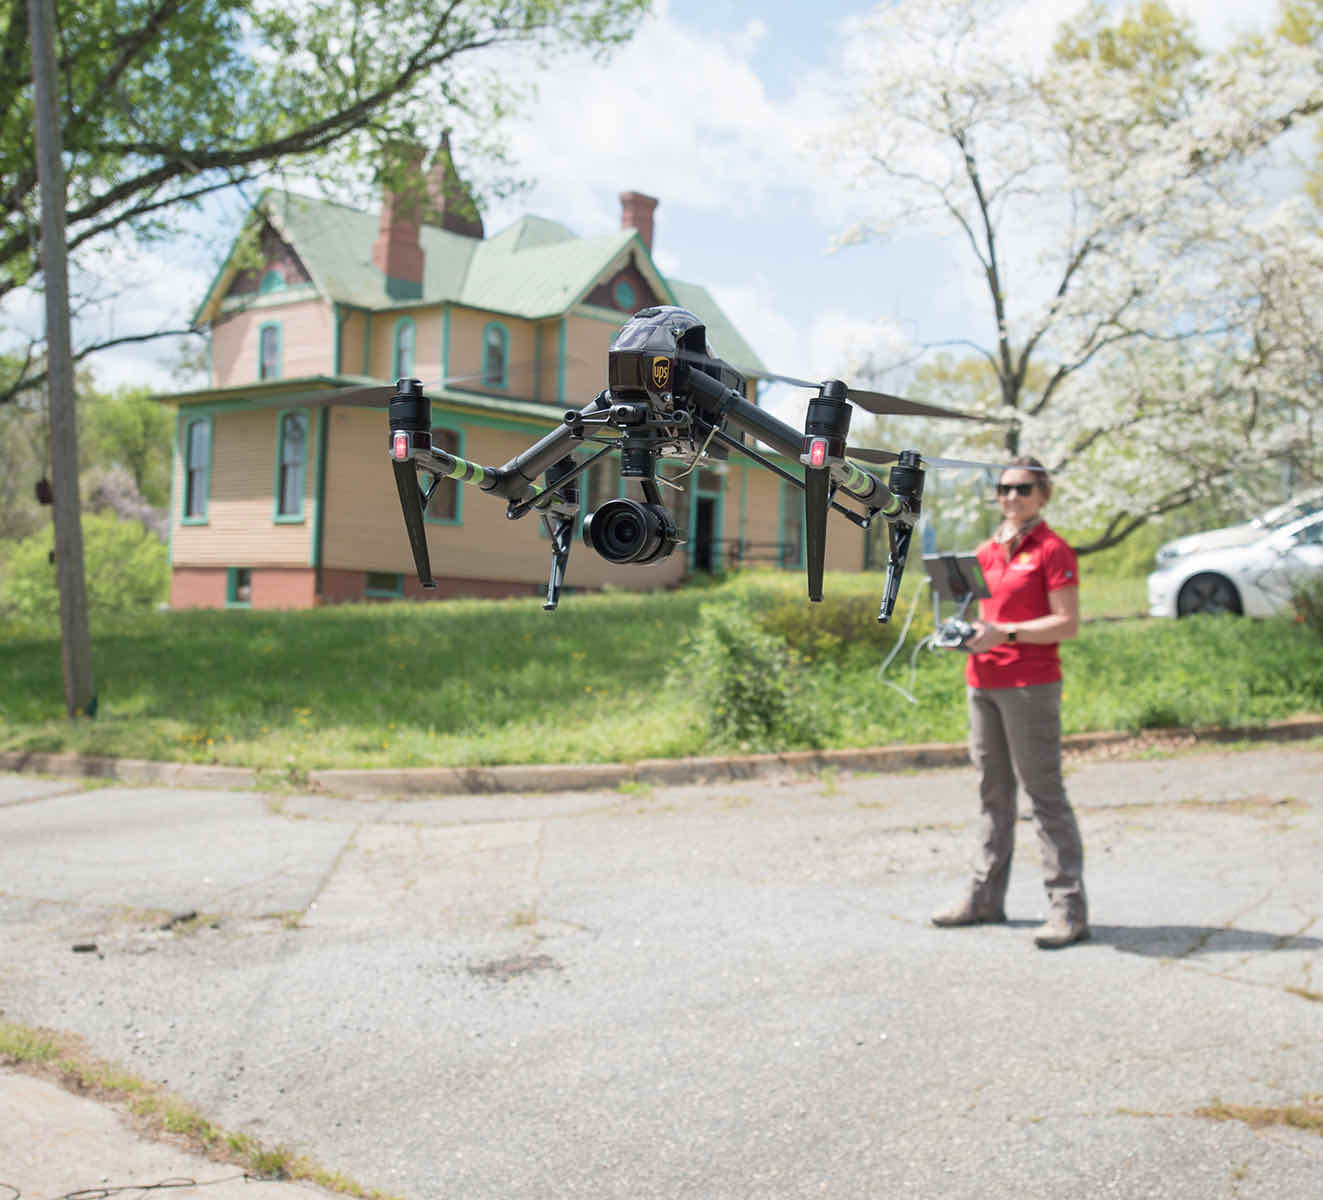 UPS tests drone delivery for helping to fight Covid-19